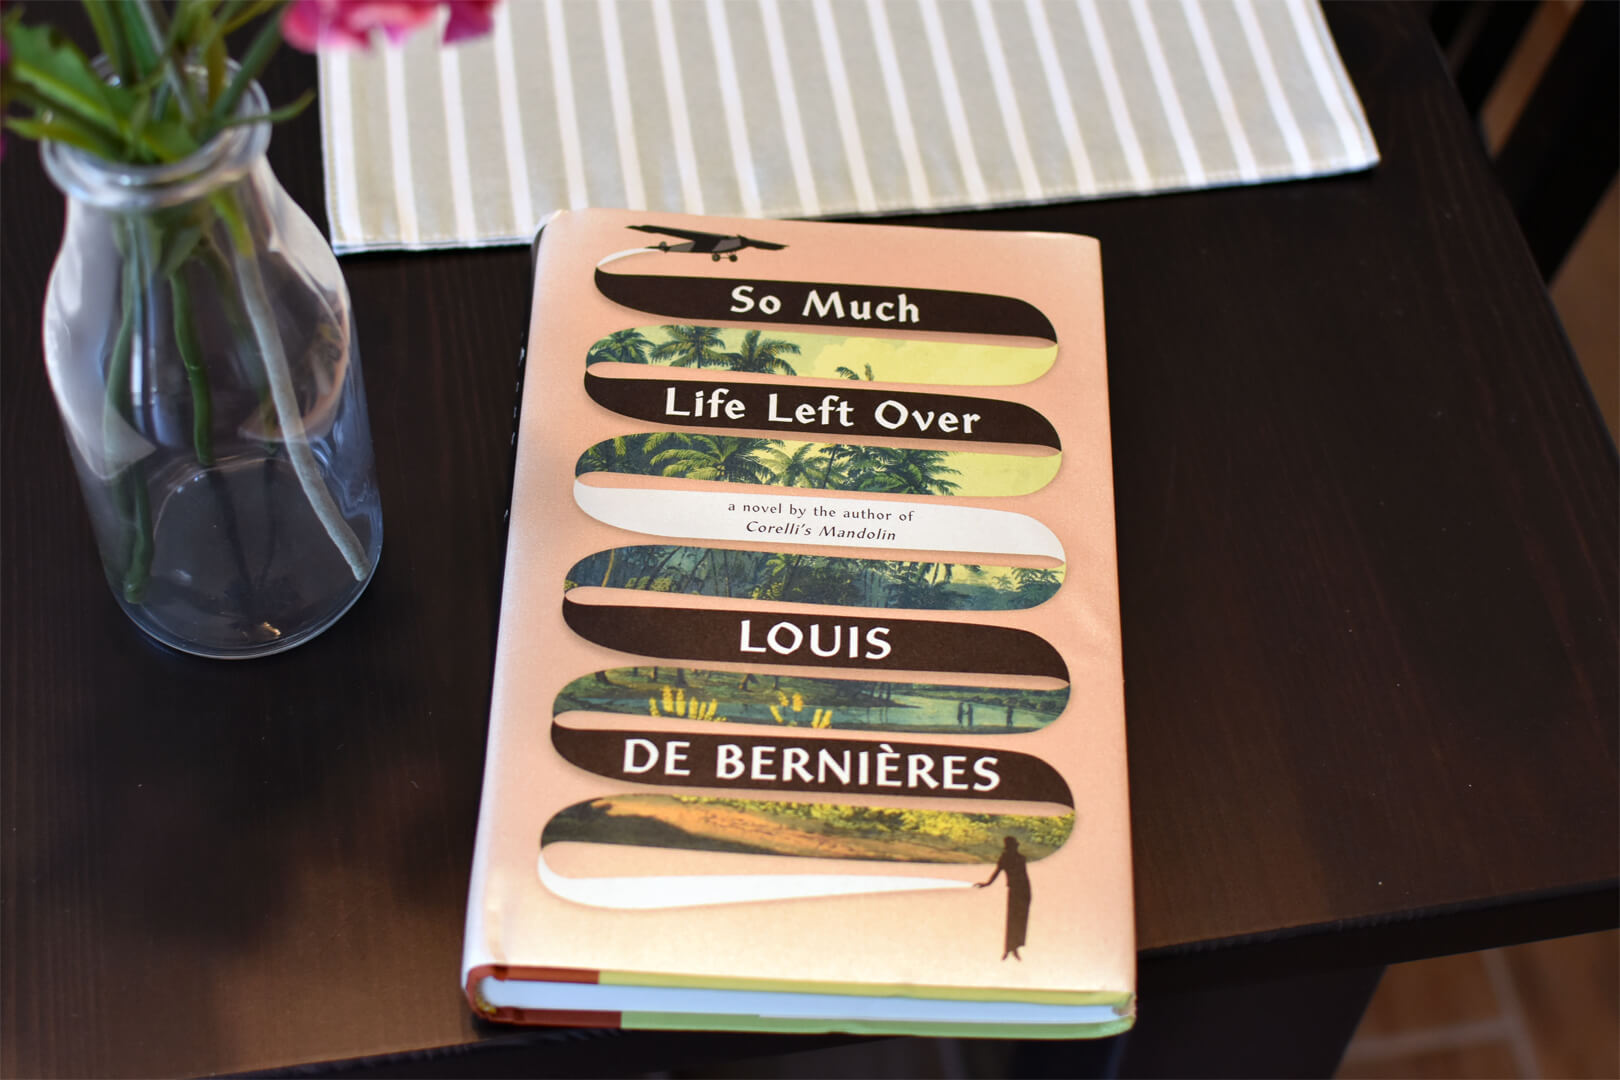 Book Club Questions for So Much Life Left Over by Louis de Bernières